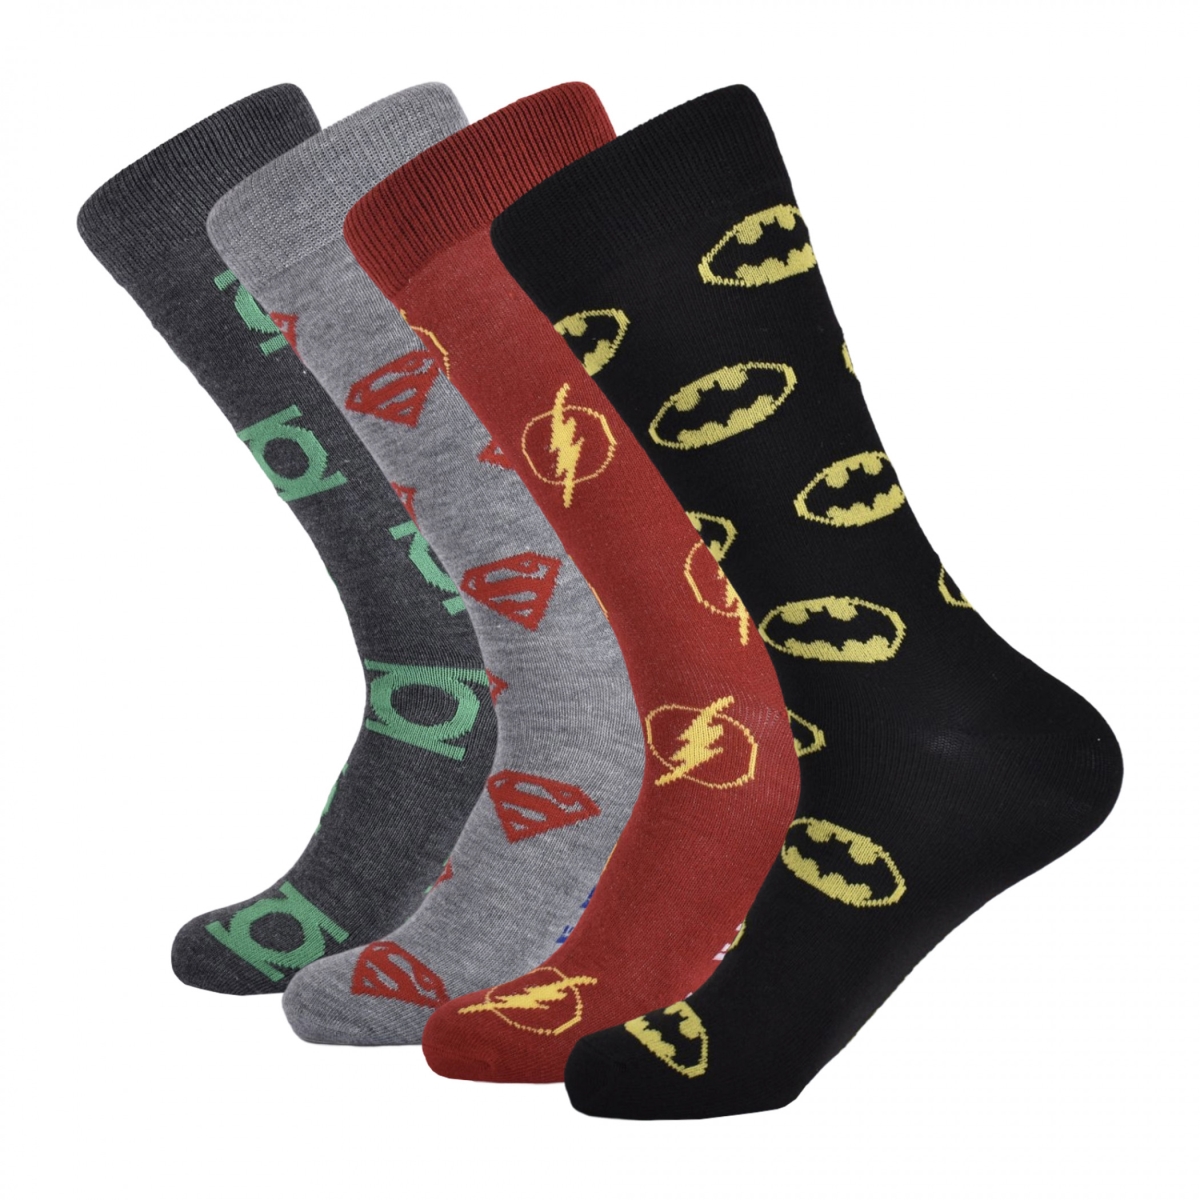 Dc Comics Justice League Crew Socks Boxed Pairs - Set of 4 -  Pathways, PA3076220